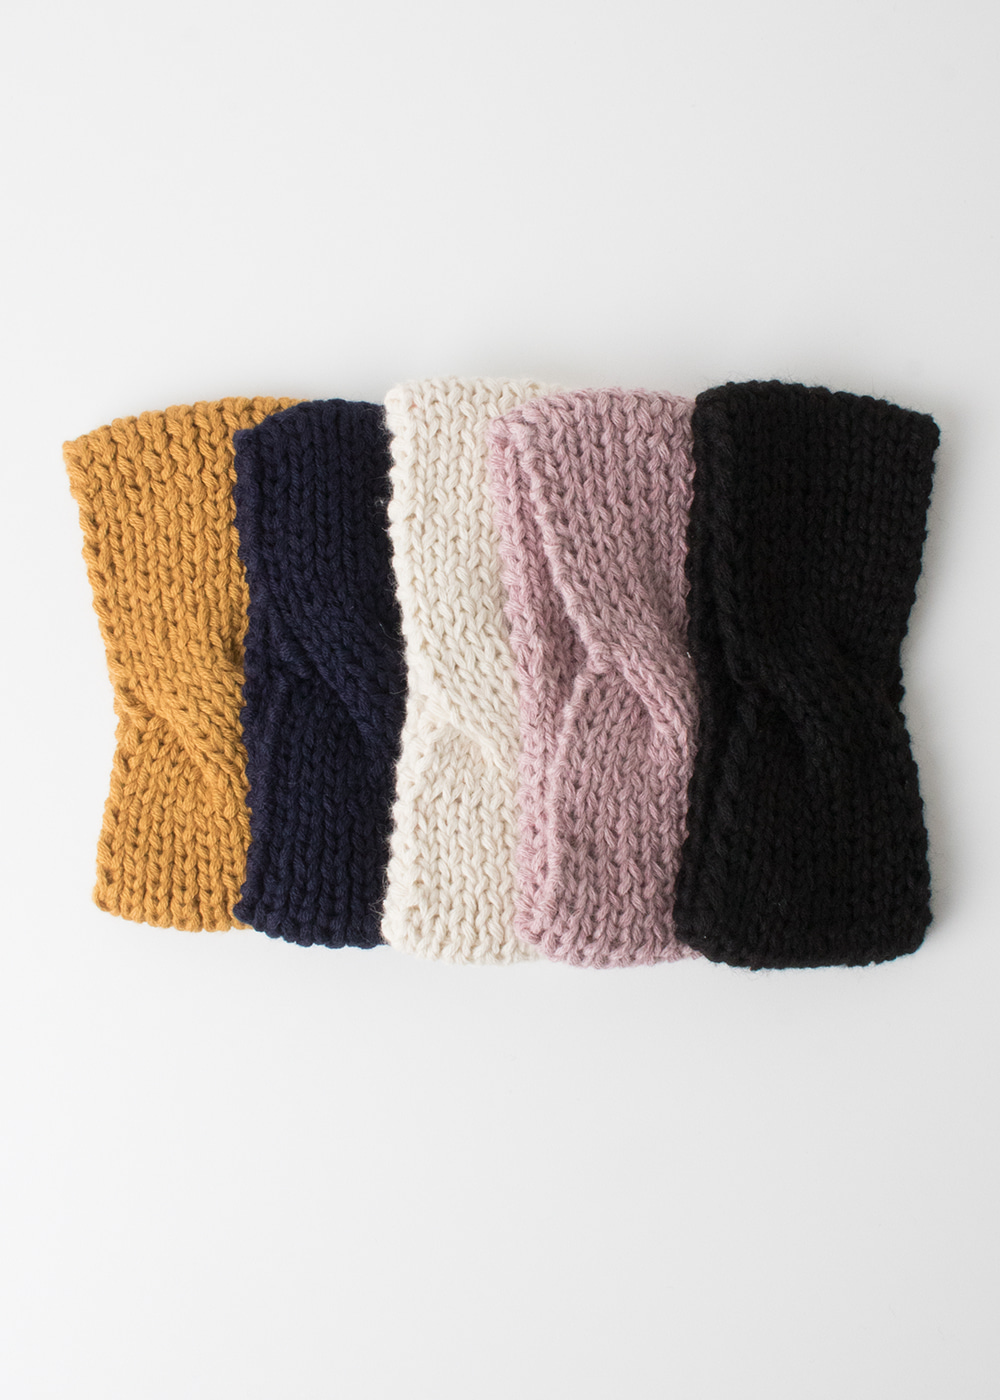 Knitted Headband - 5 colors